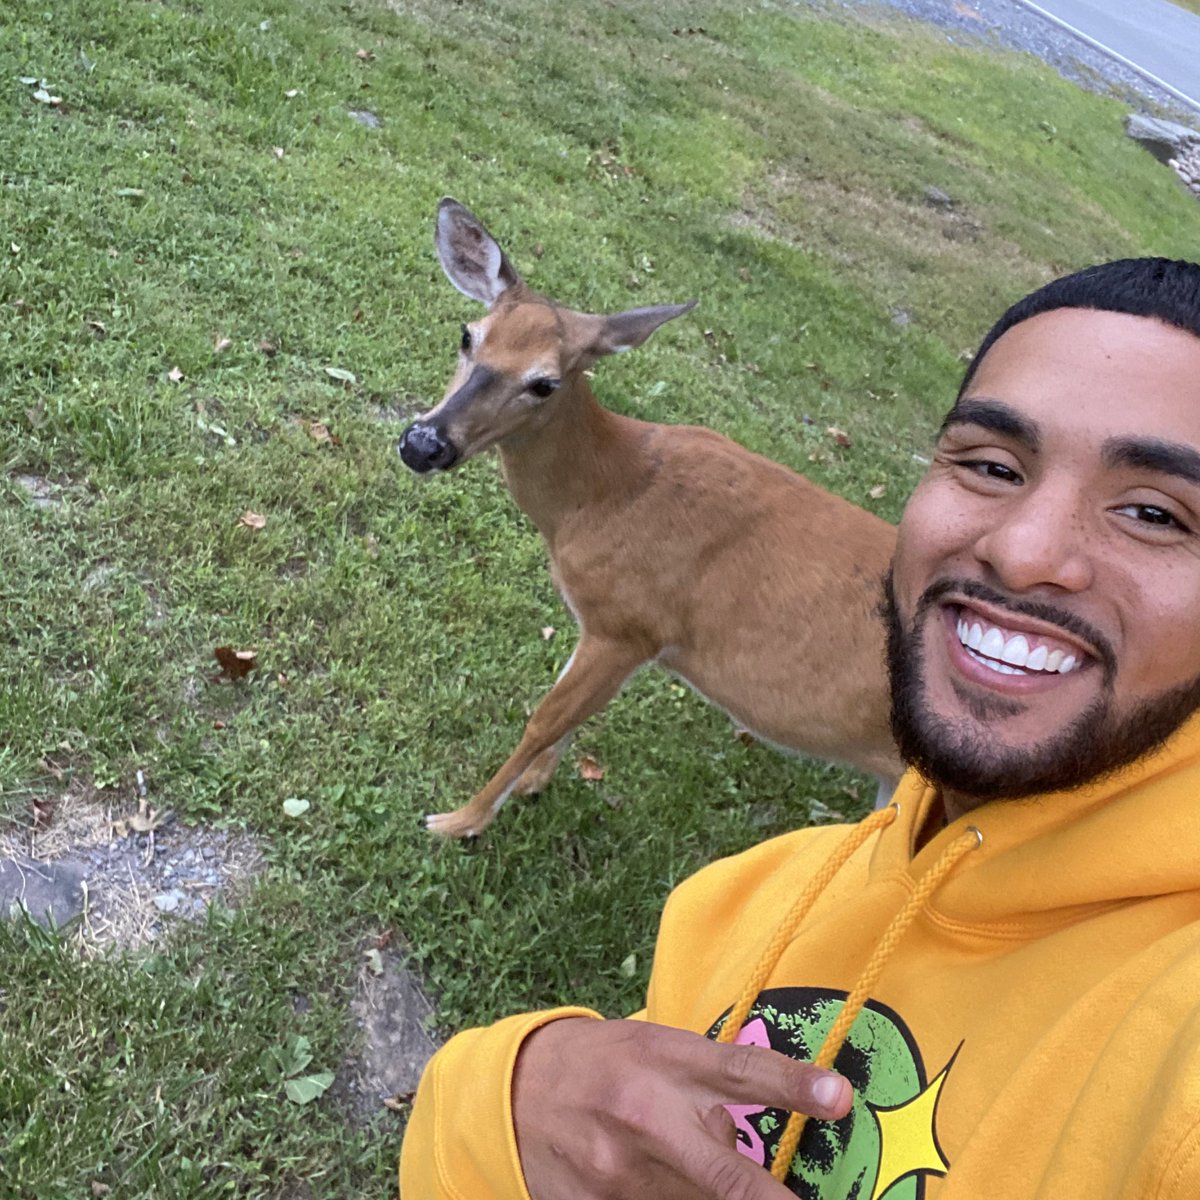 Brother Nature on Twitter: "Seen that girl Canela today she me she ain't forget https://t.co/xAulPIquRj" / Twitter